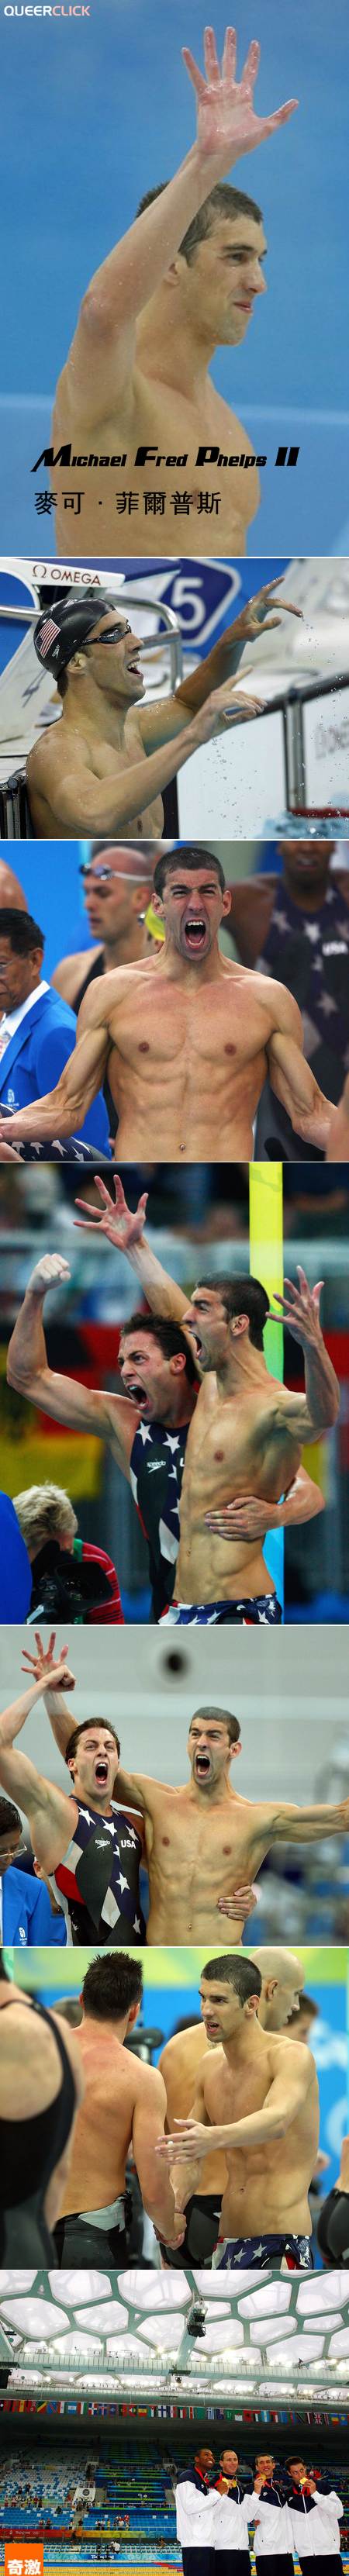 Olympic Hotties Day 3 Michael Phelps